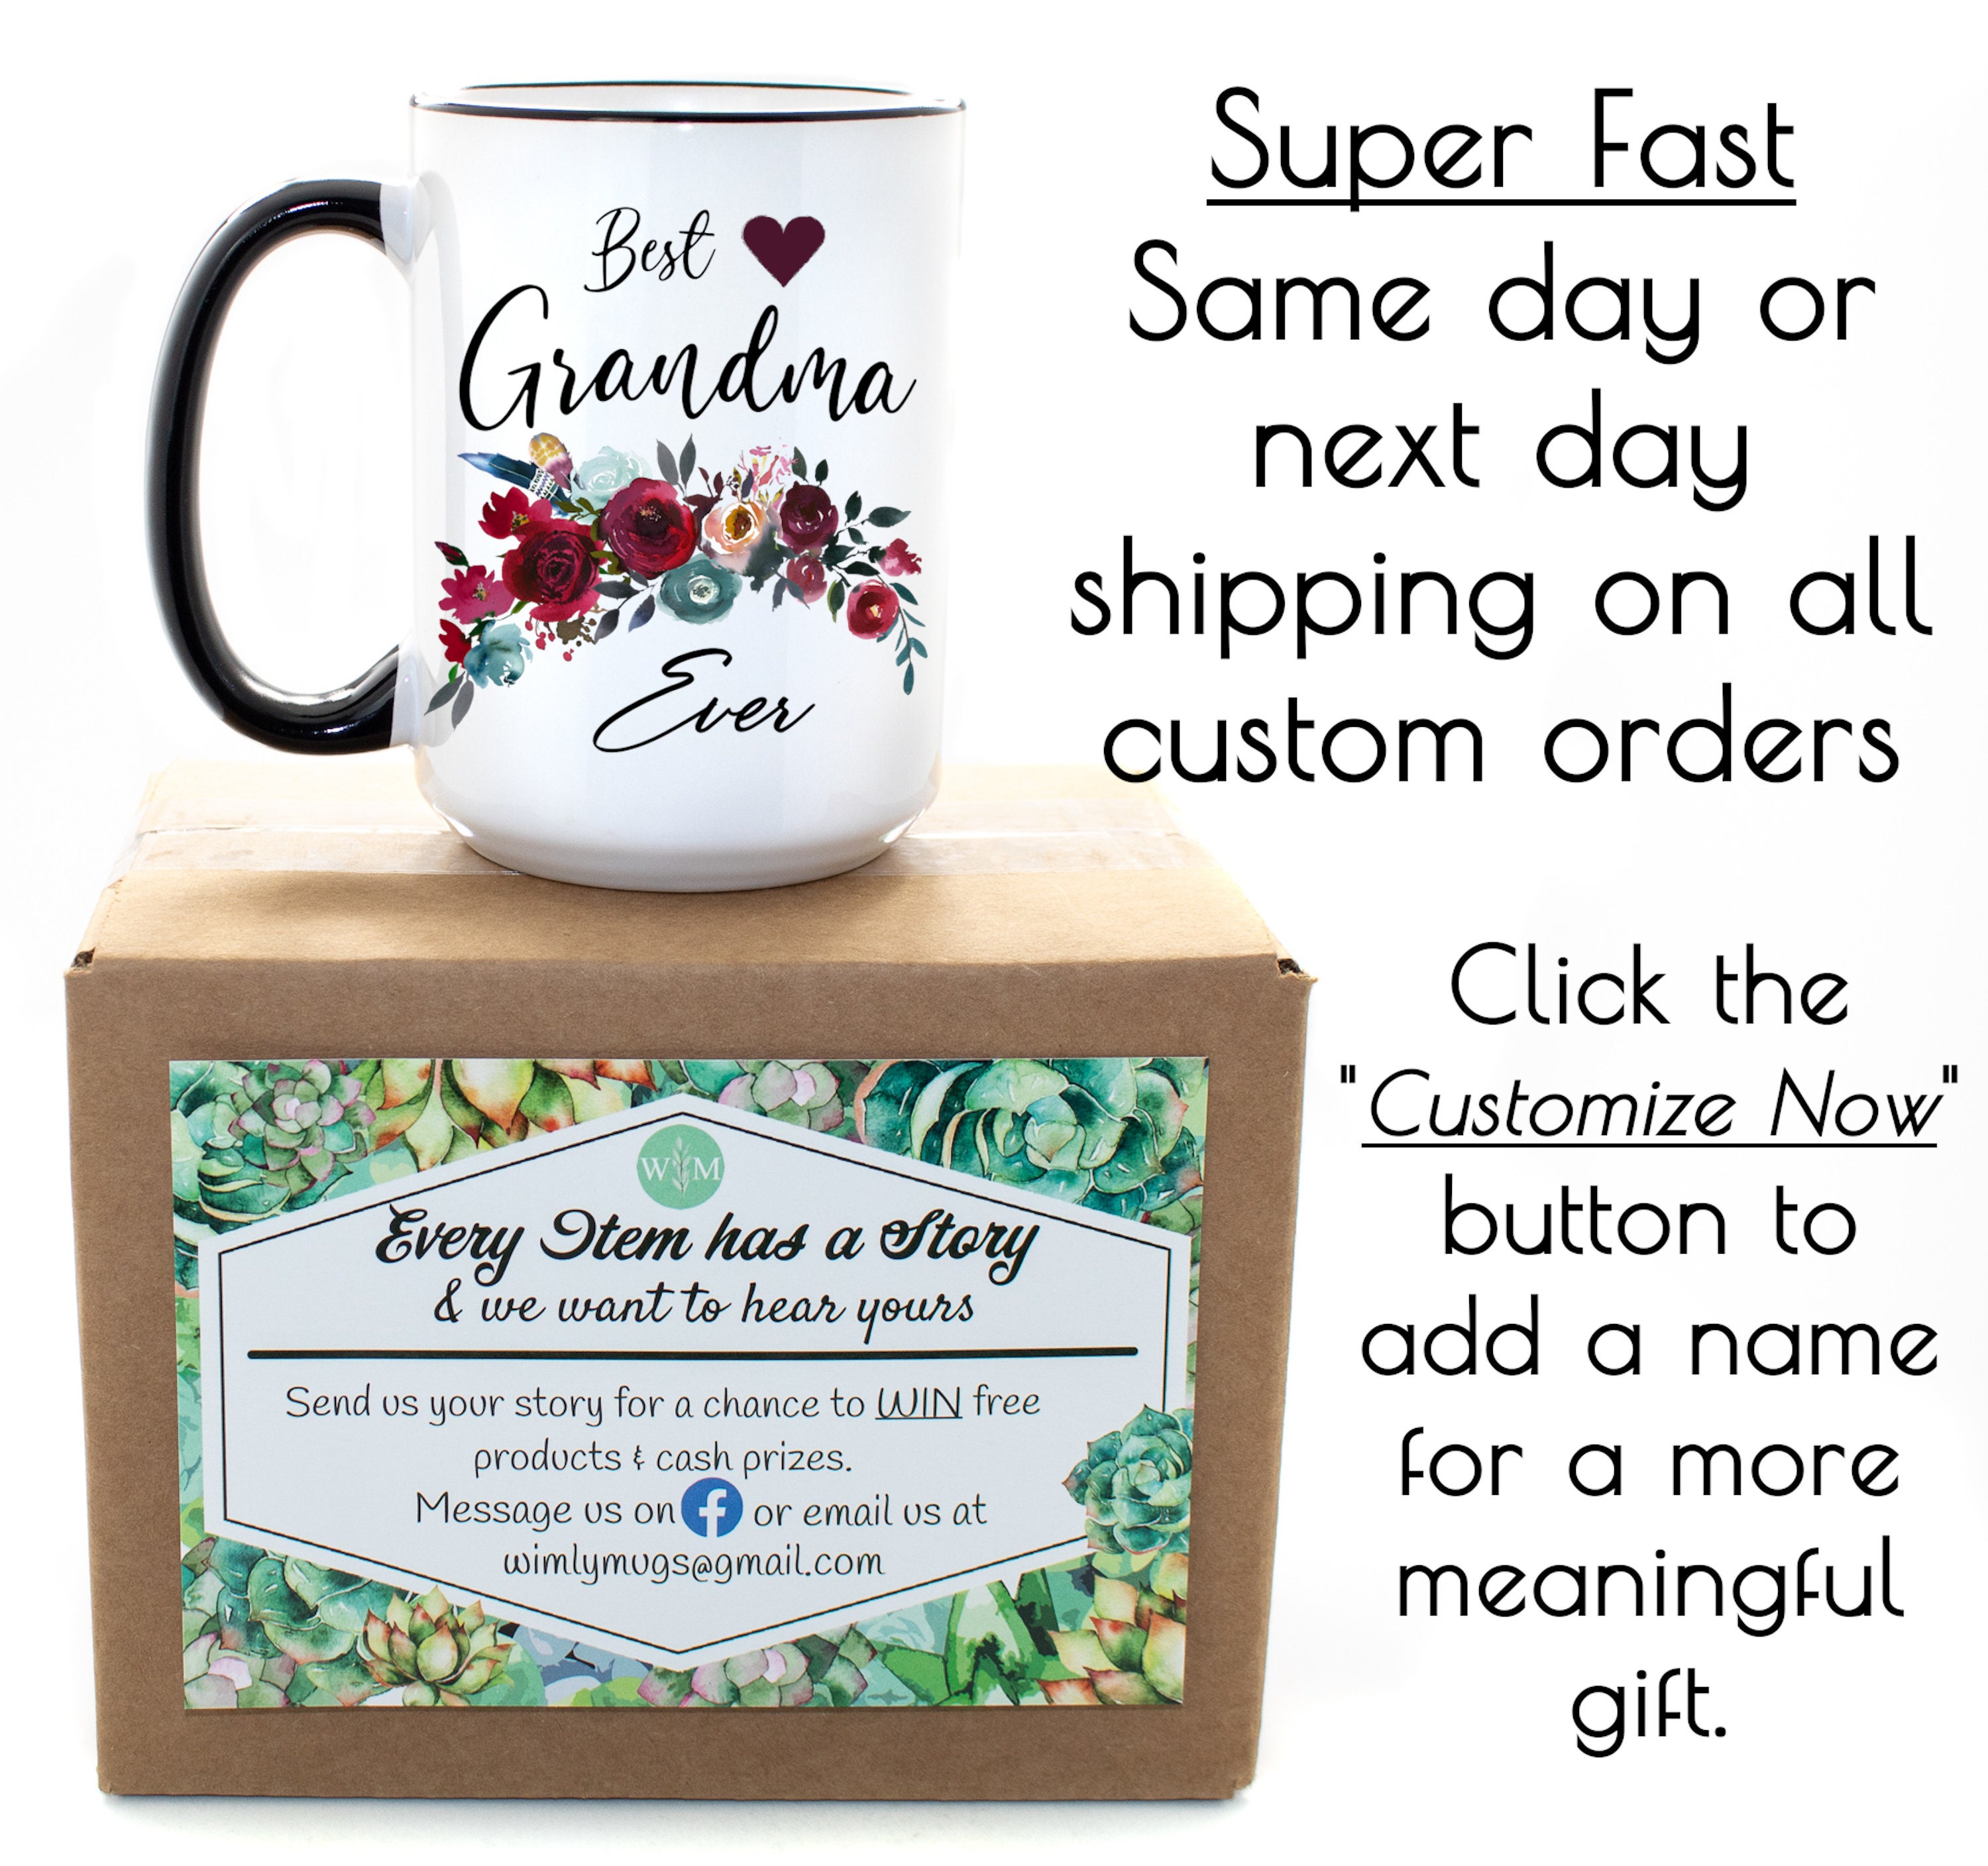 InterestPrint Christmas Day Gifts Worlds Best Grandma Ceramic Coffee Mugs Office Tea Cups Floral Design 11oz Best Birthday or Mothers Day Gift Idea for Grandma Nana Grammy Mimi